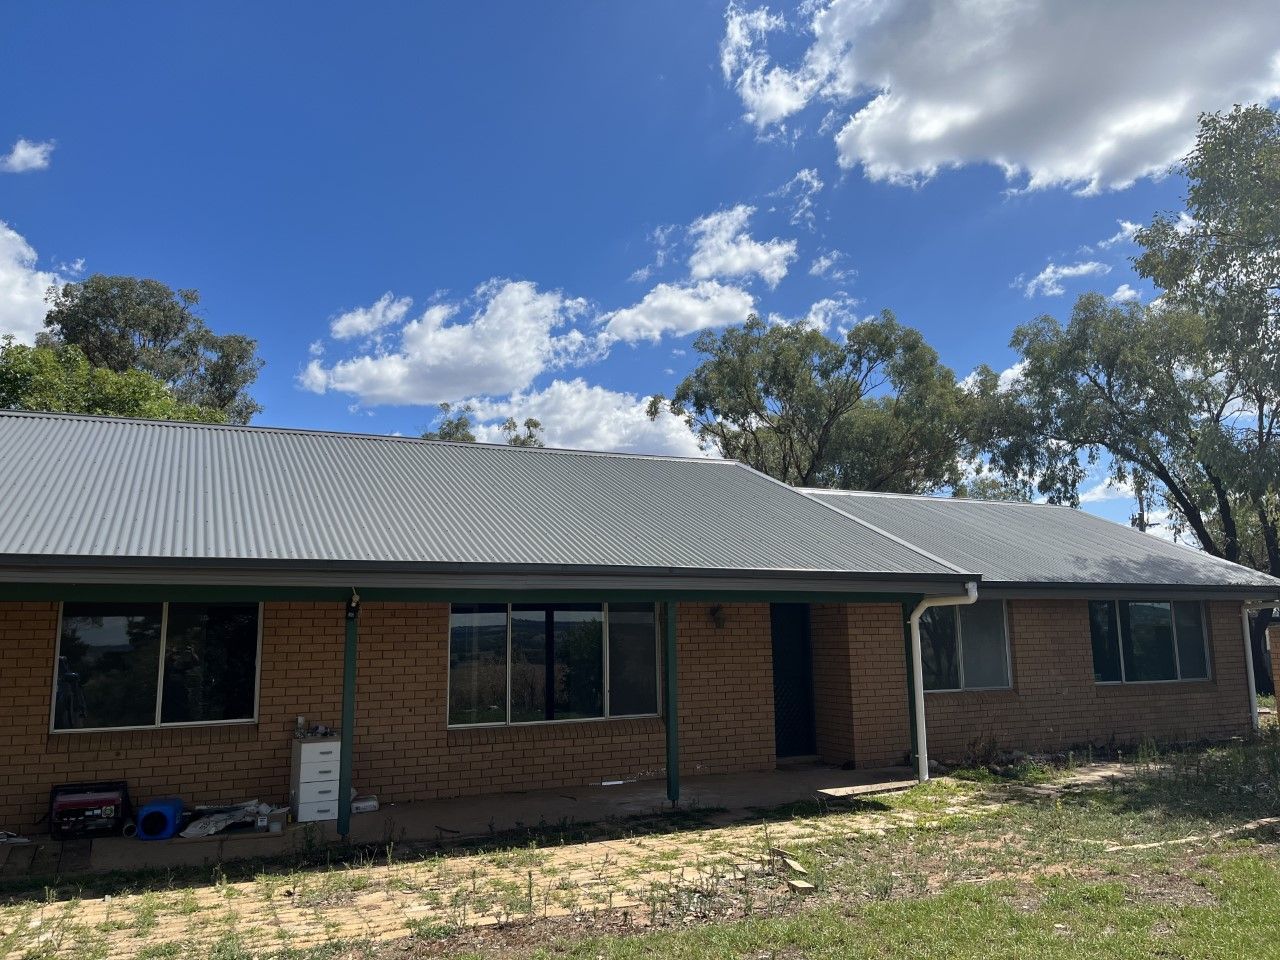 New roof Replacment— Roofer in Orange, NSW